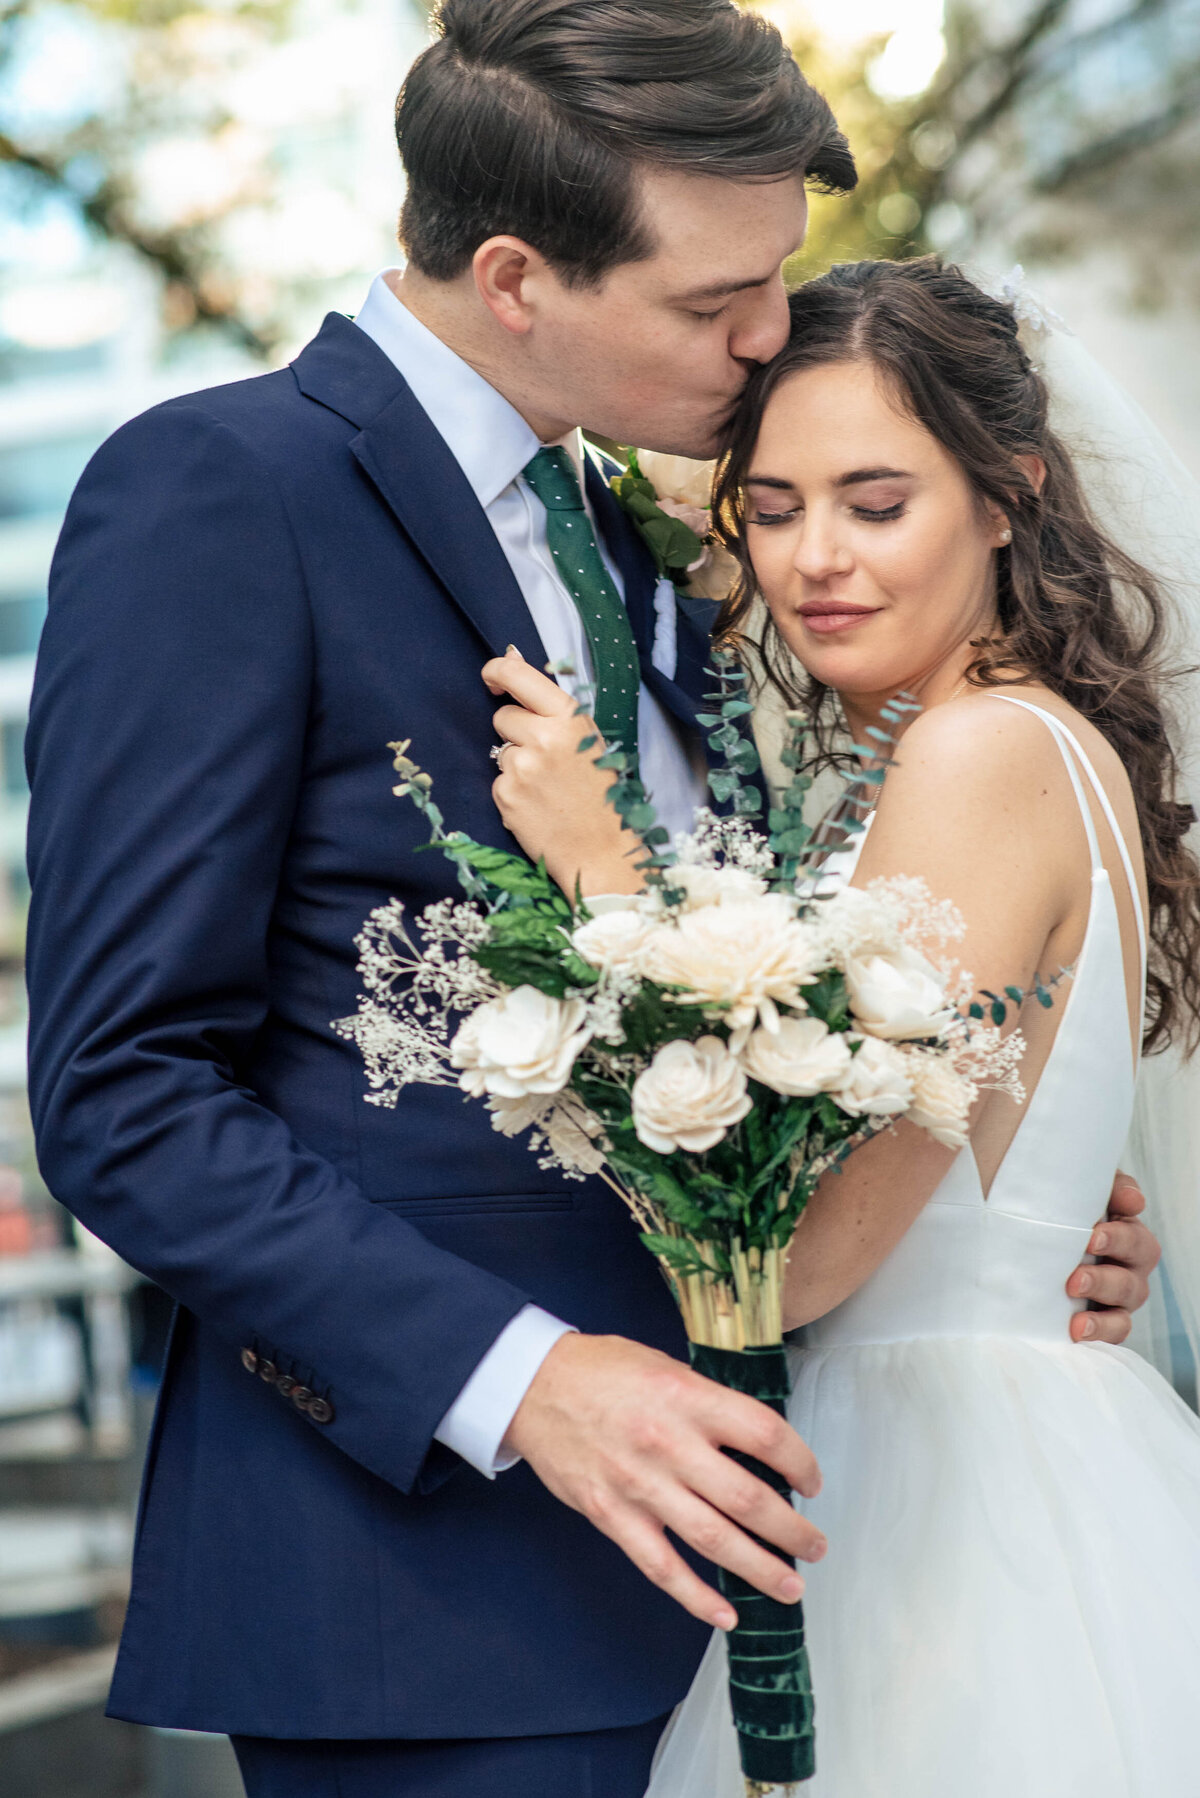 Up close portrait of a bride holding her groom's jacket lapel as he pulls her in and kisses her head by Charlotte wedding photographers DeLong Photography